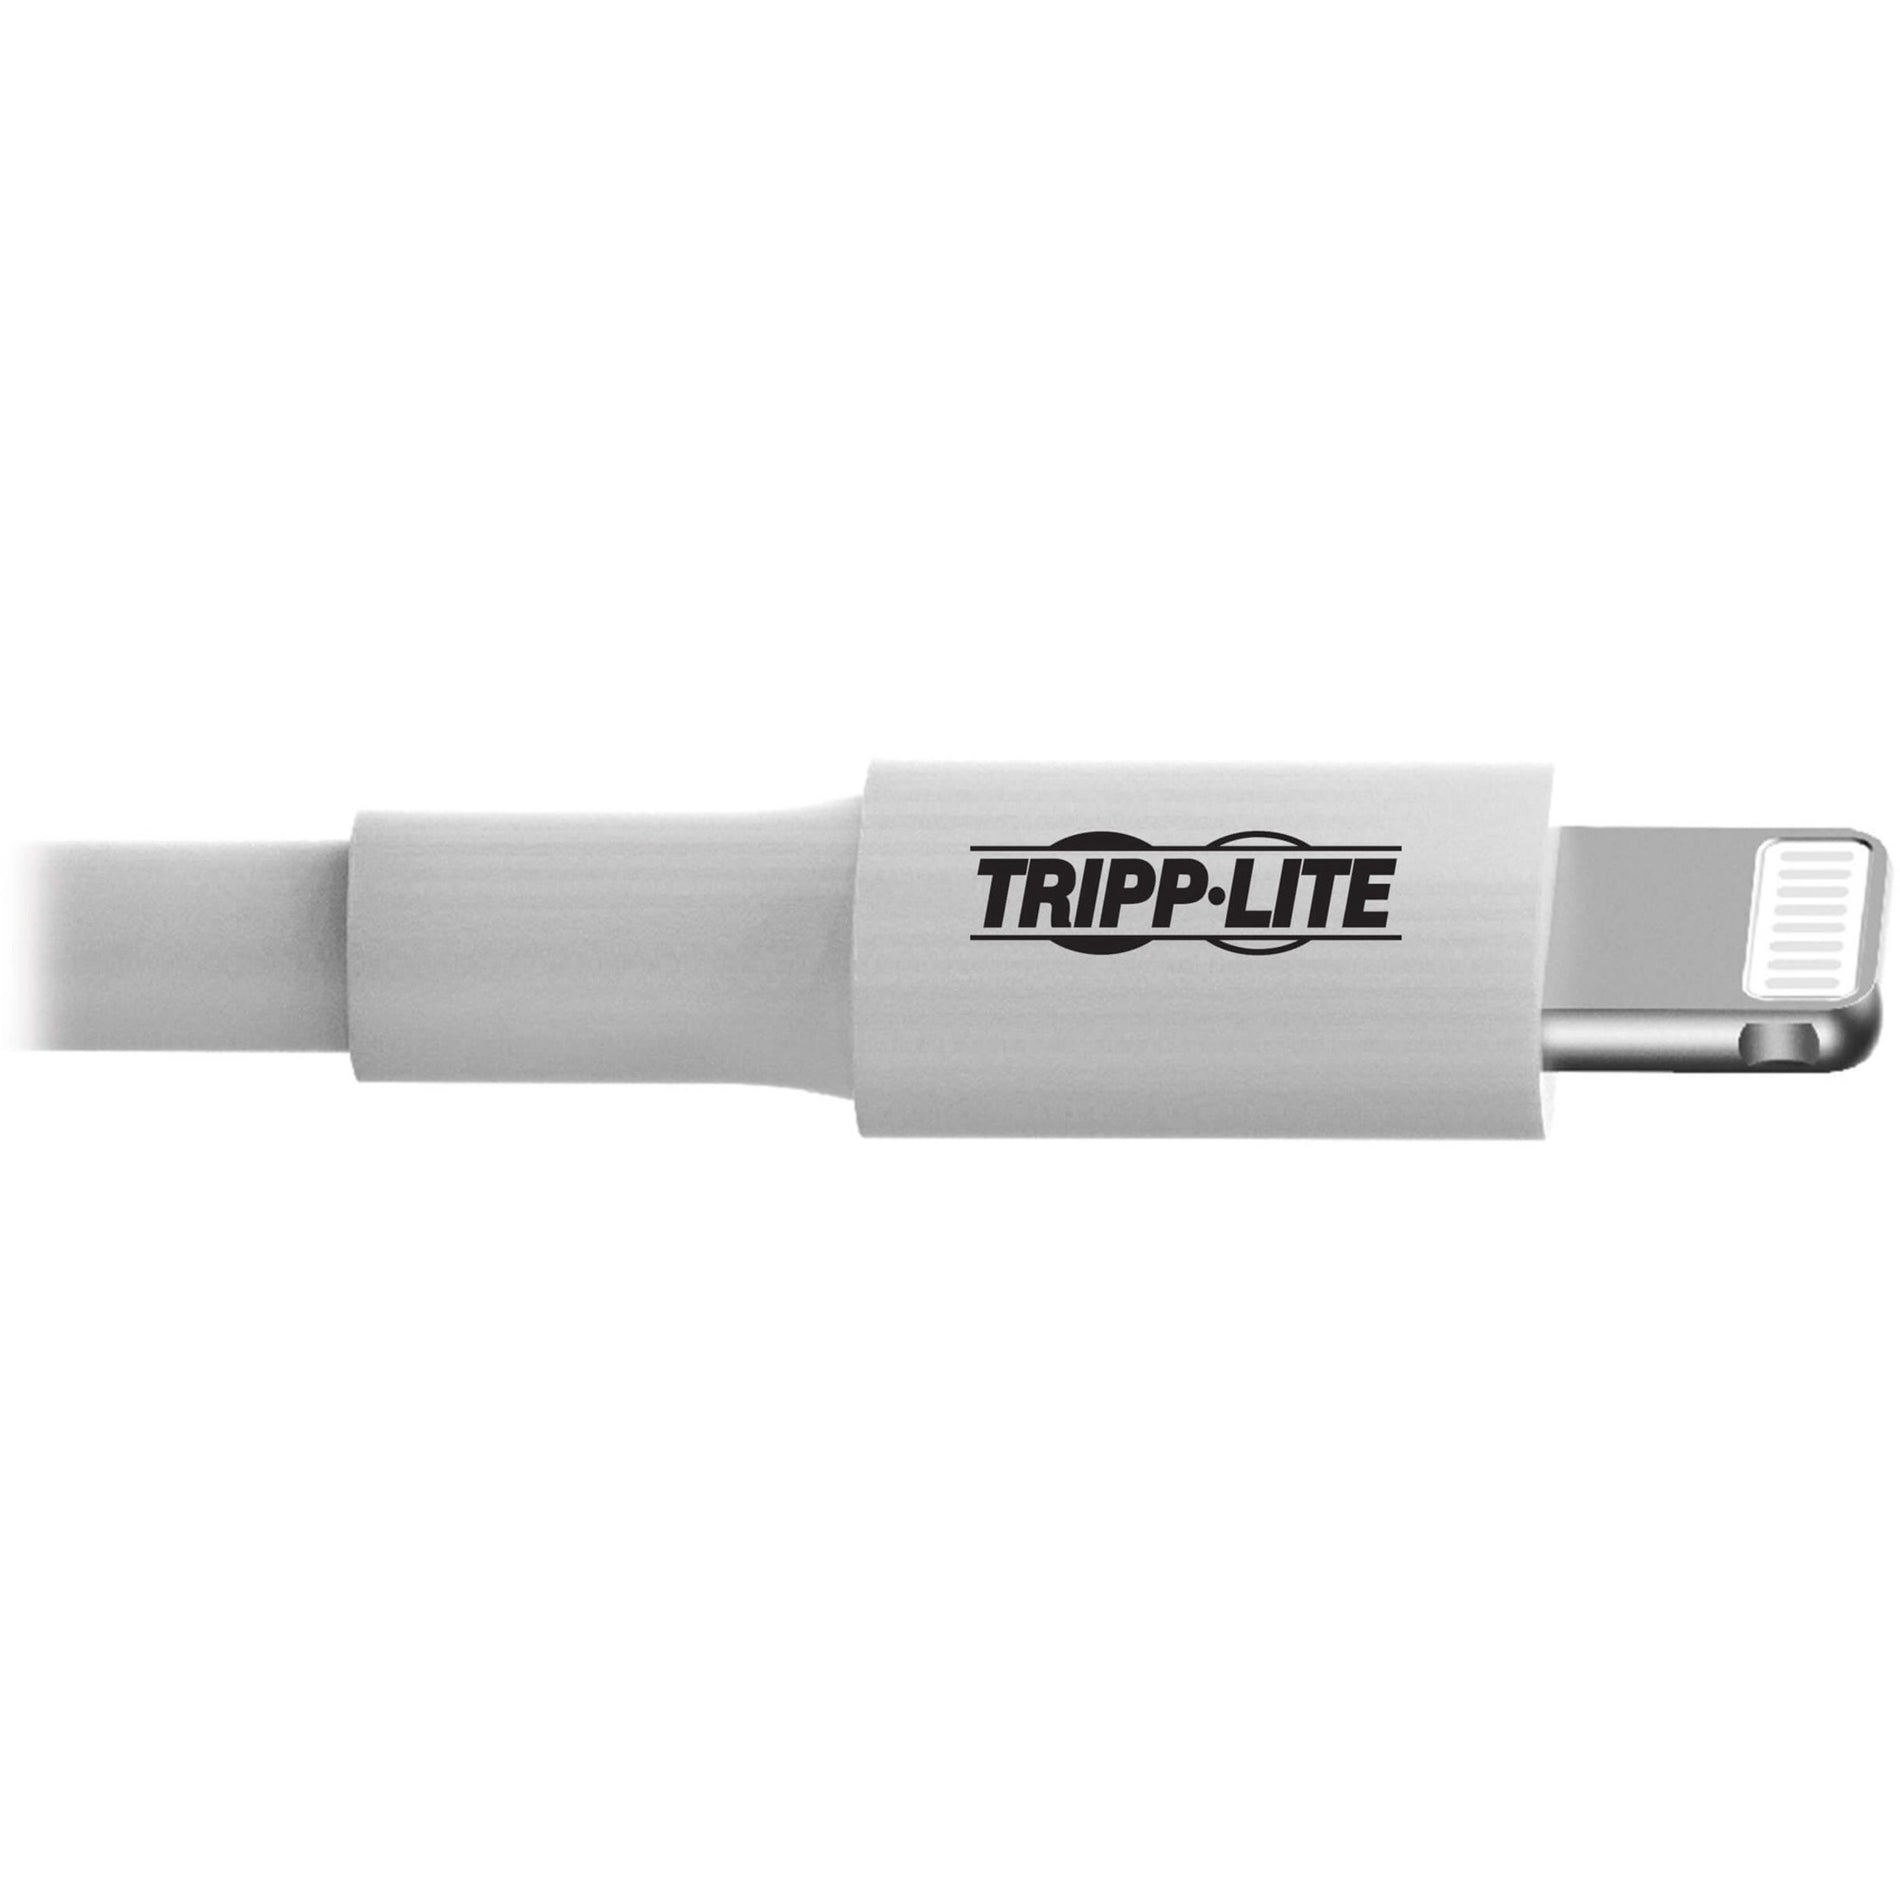 Tripp Lite M100-010-WH USB Sync/Charge Cable with Lightning Connector, White, 10 ft. (3 m)